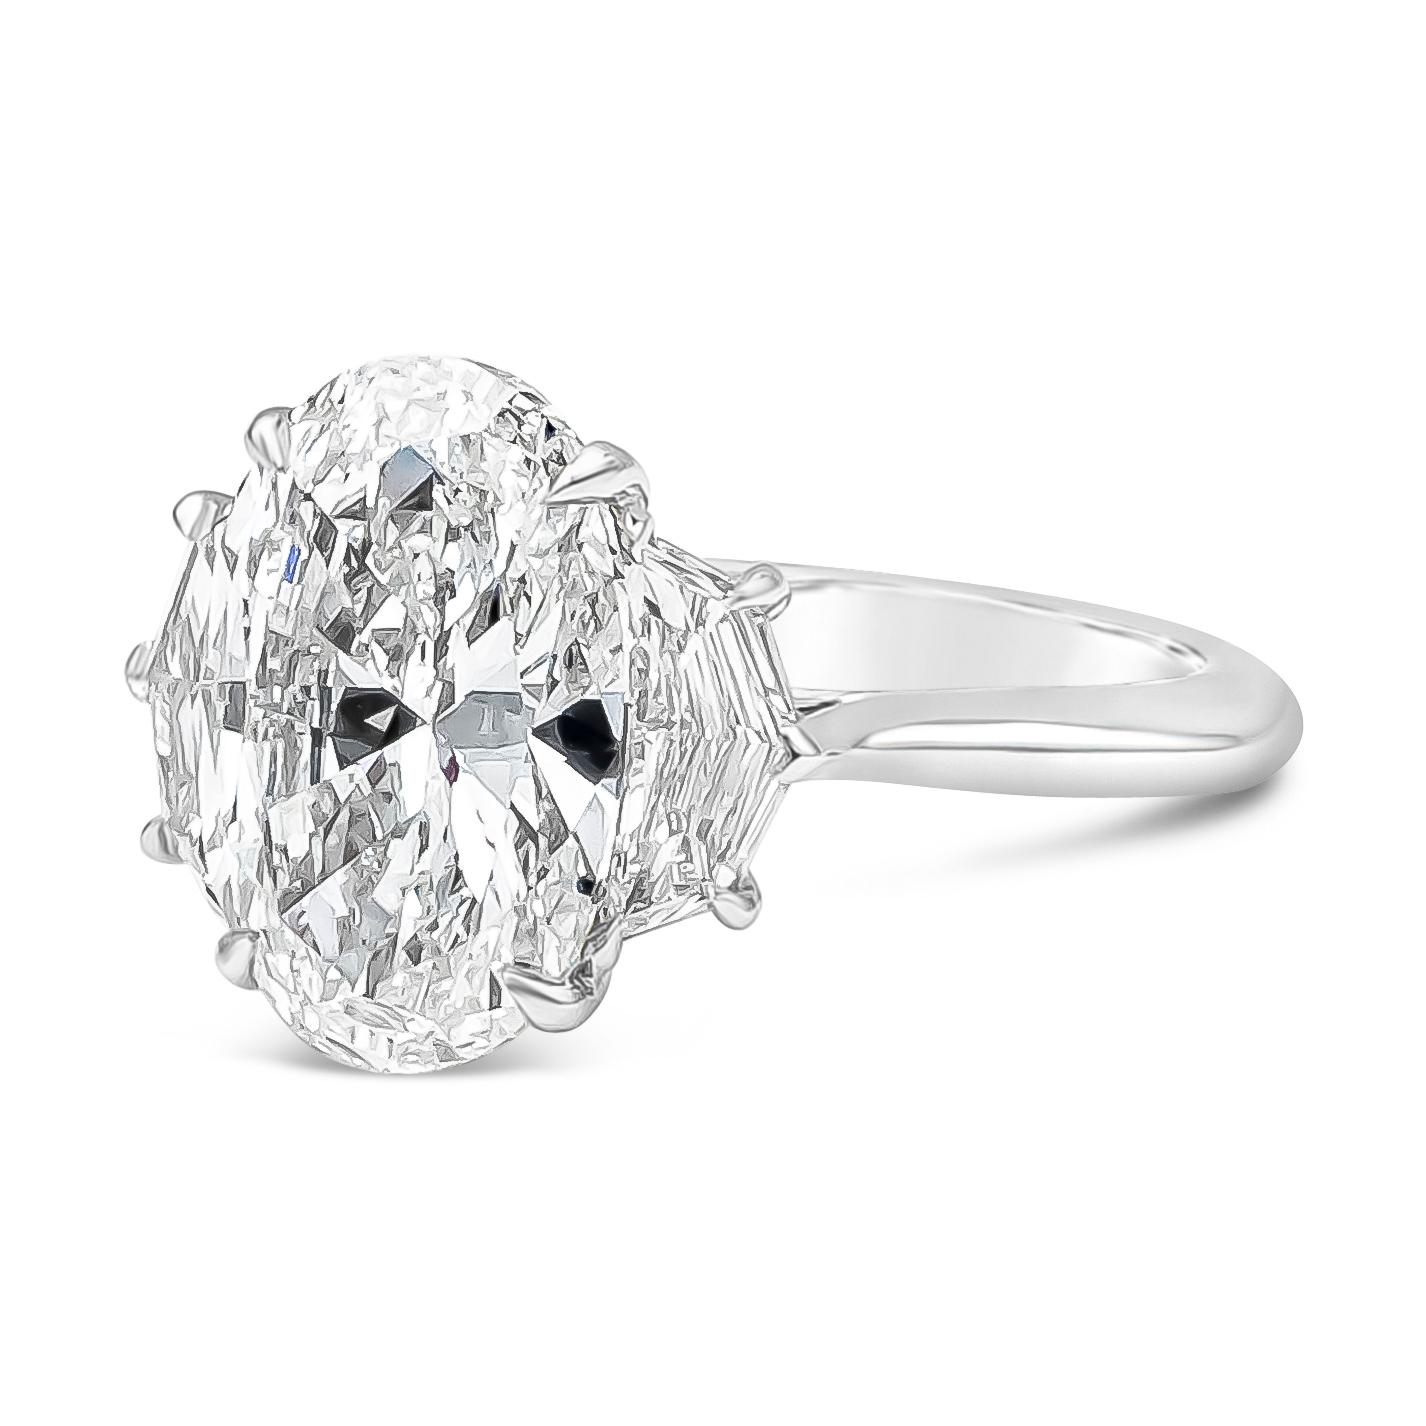 A stunning three-stone engagement ring showcasing a GIA Certified oval cut diamond weighing 4.02 carats total, D Color and VS1 in Clarity. Flanked by 2 epaulette diamonds on each side weighing 0.59 carats total, E-F Color and VS in Clarity. Made